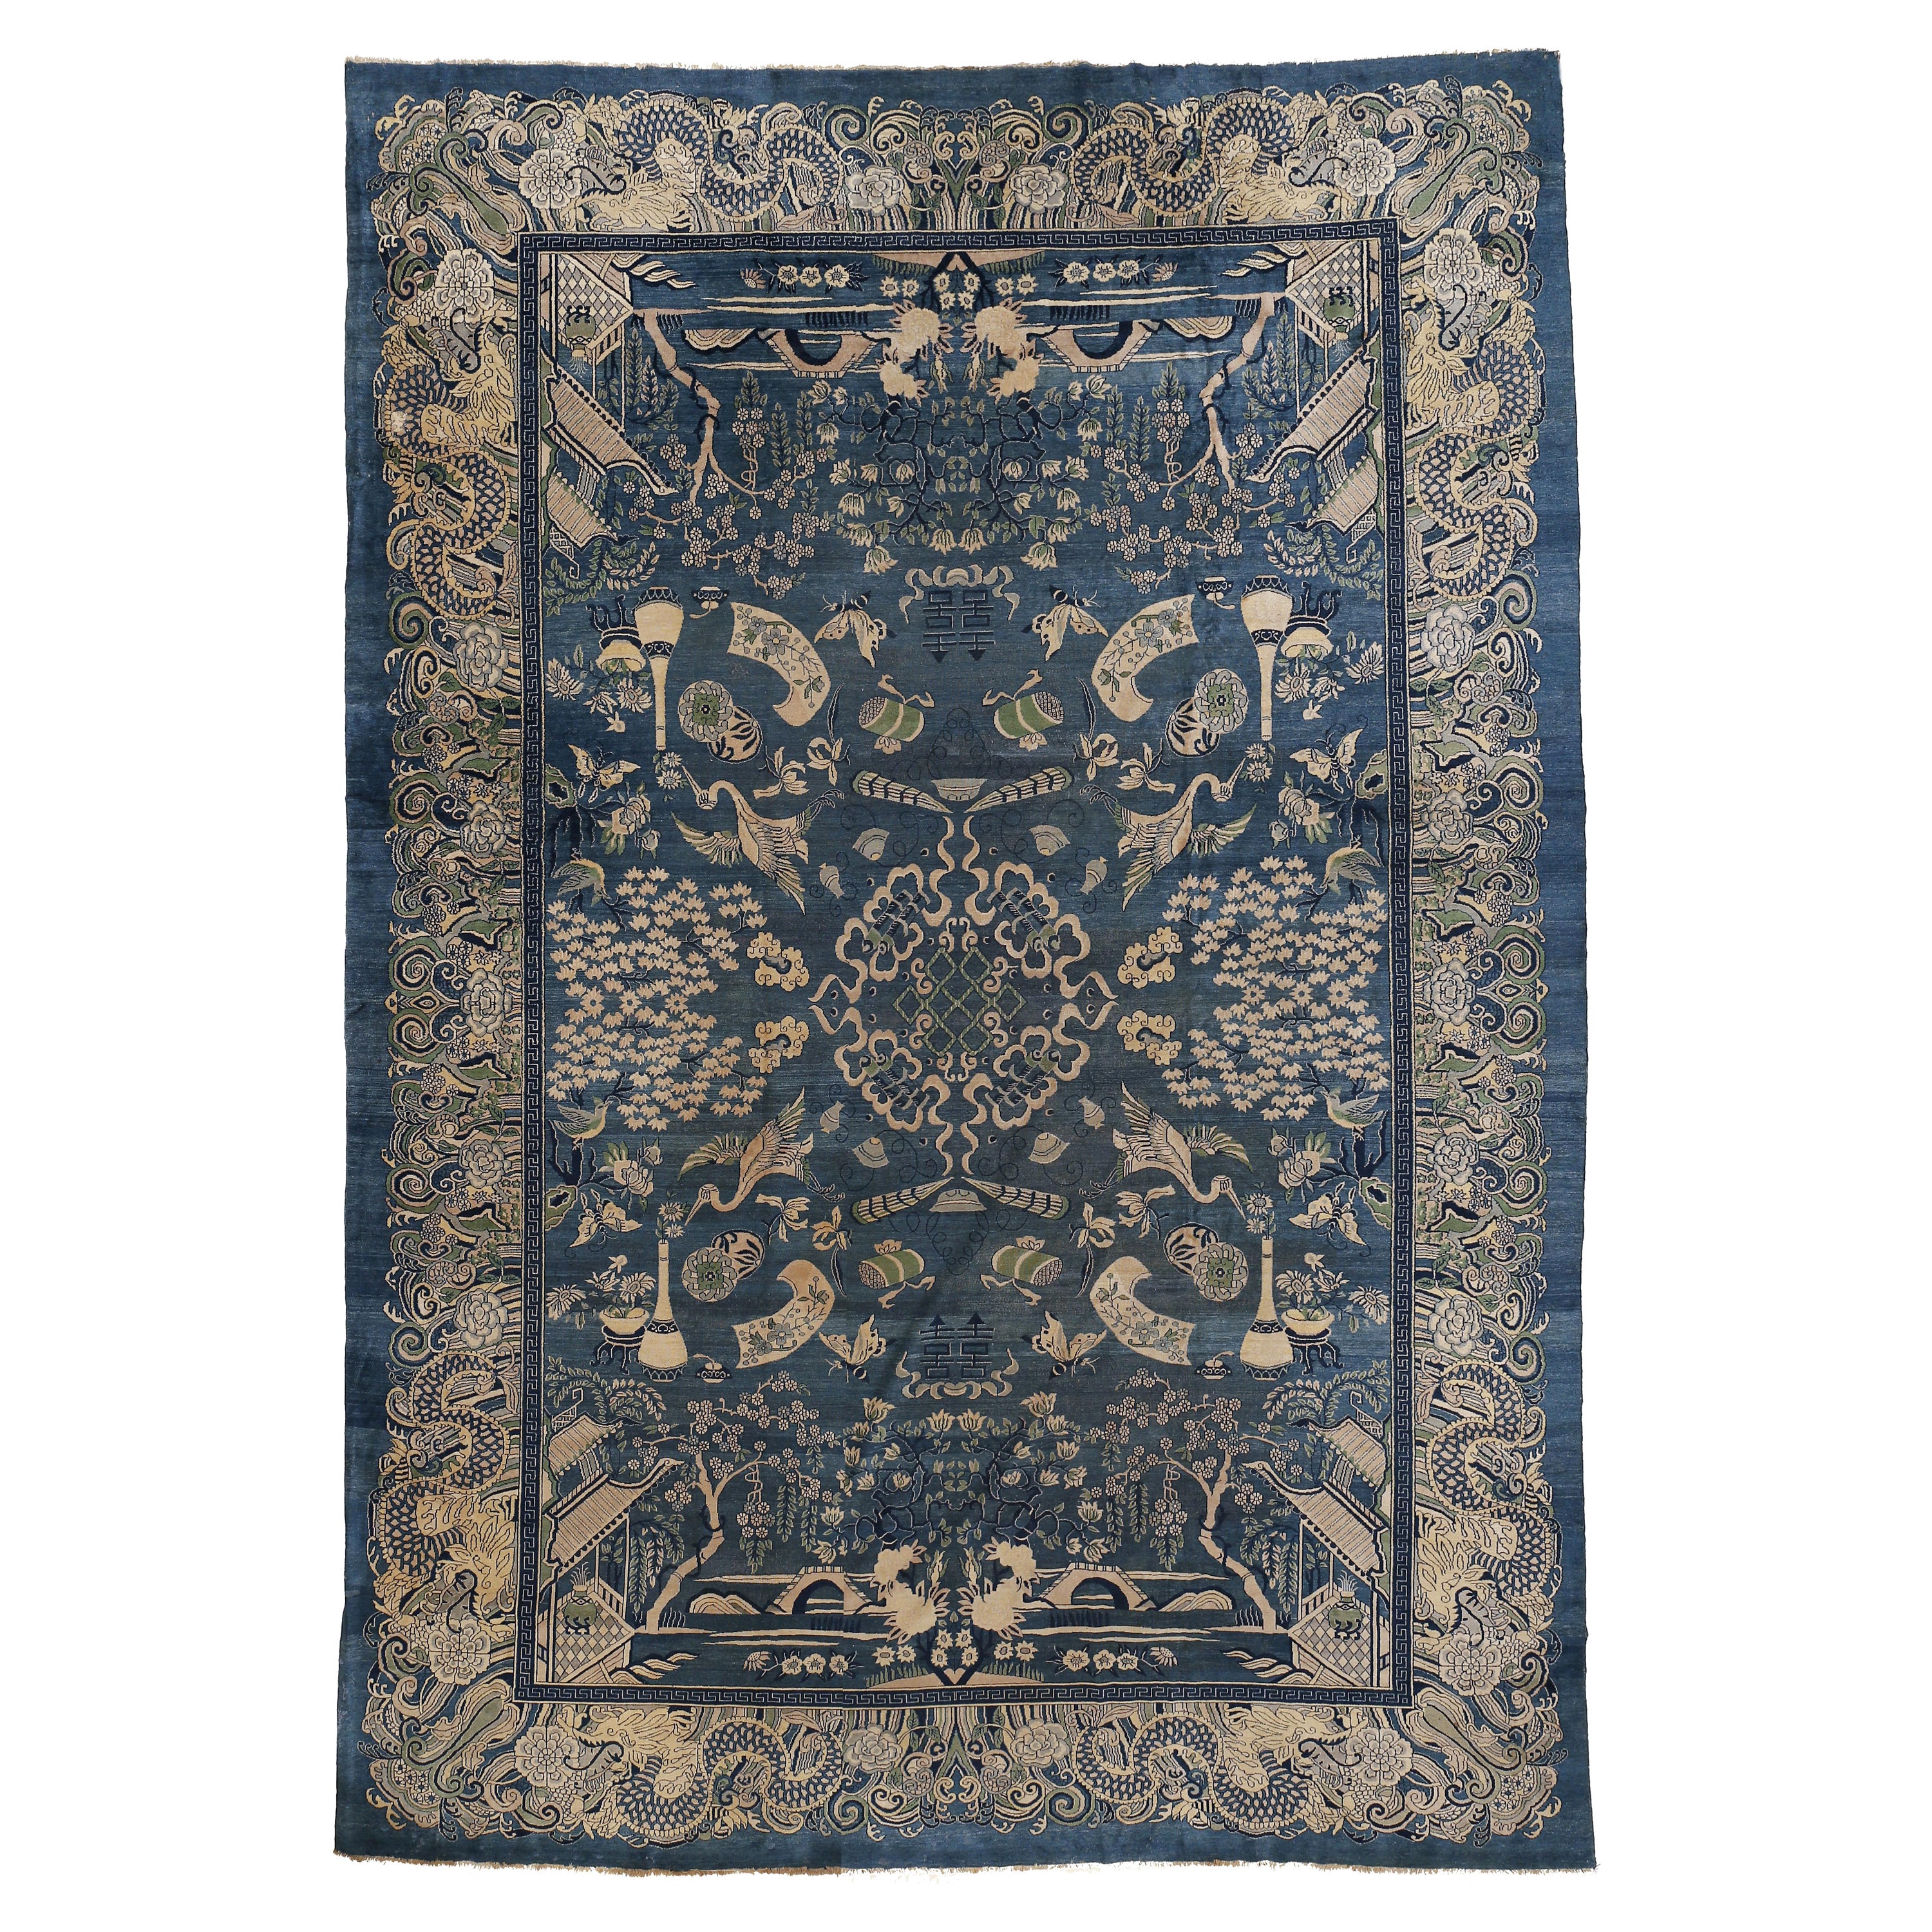 Spectacular Antique Sky Blue Indochine Rug with Cranes and Longevity Symbols For Sale